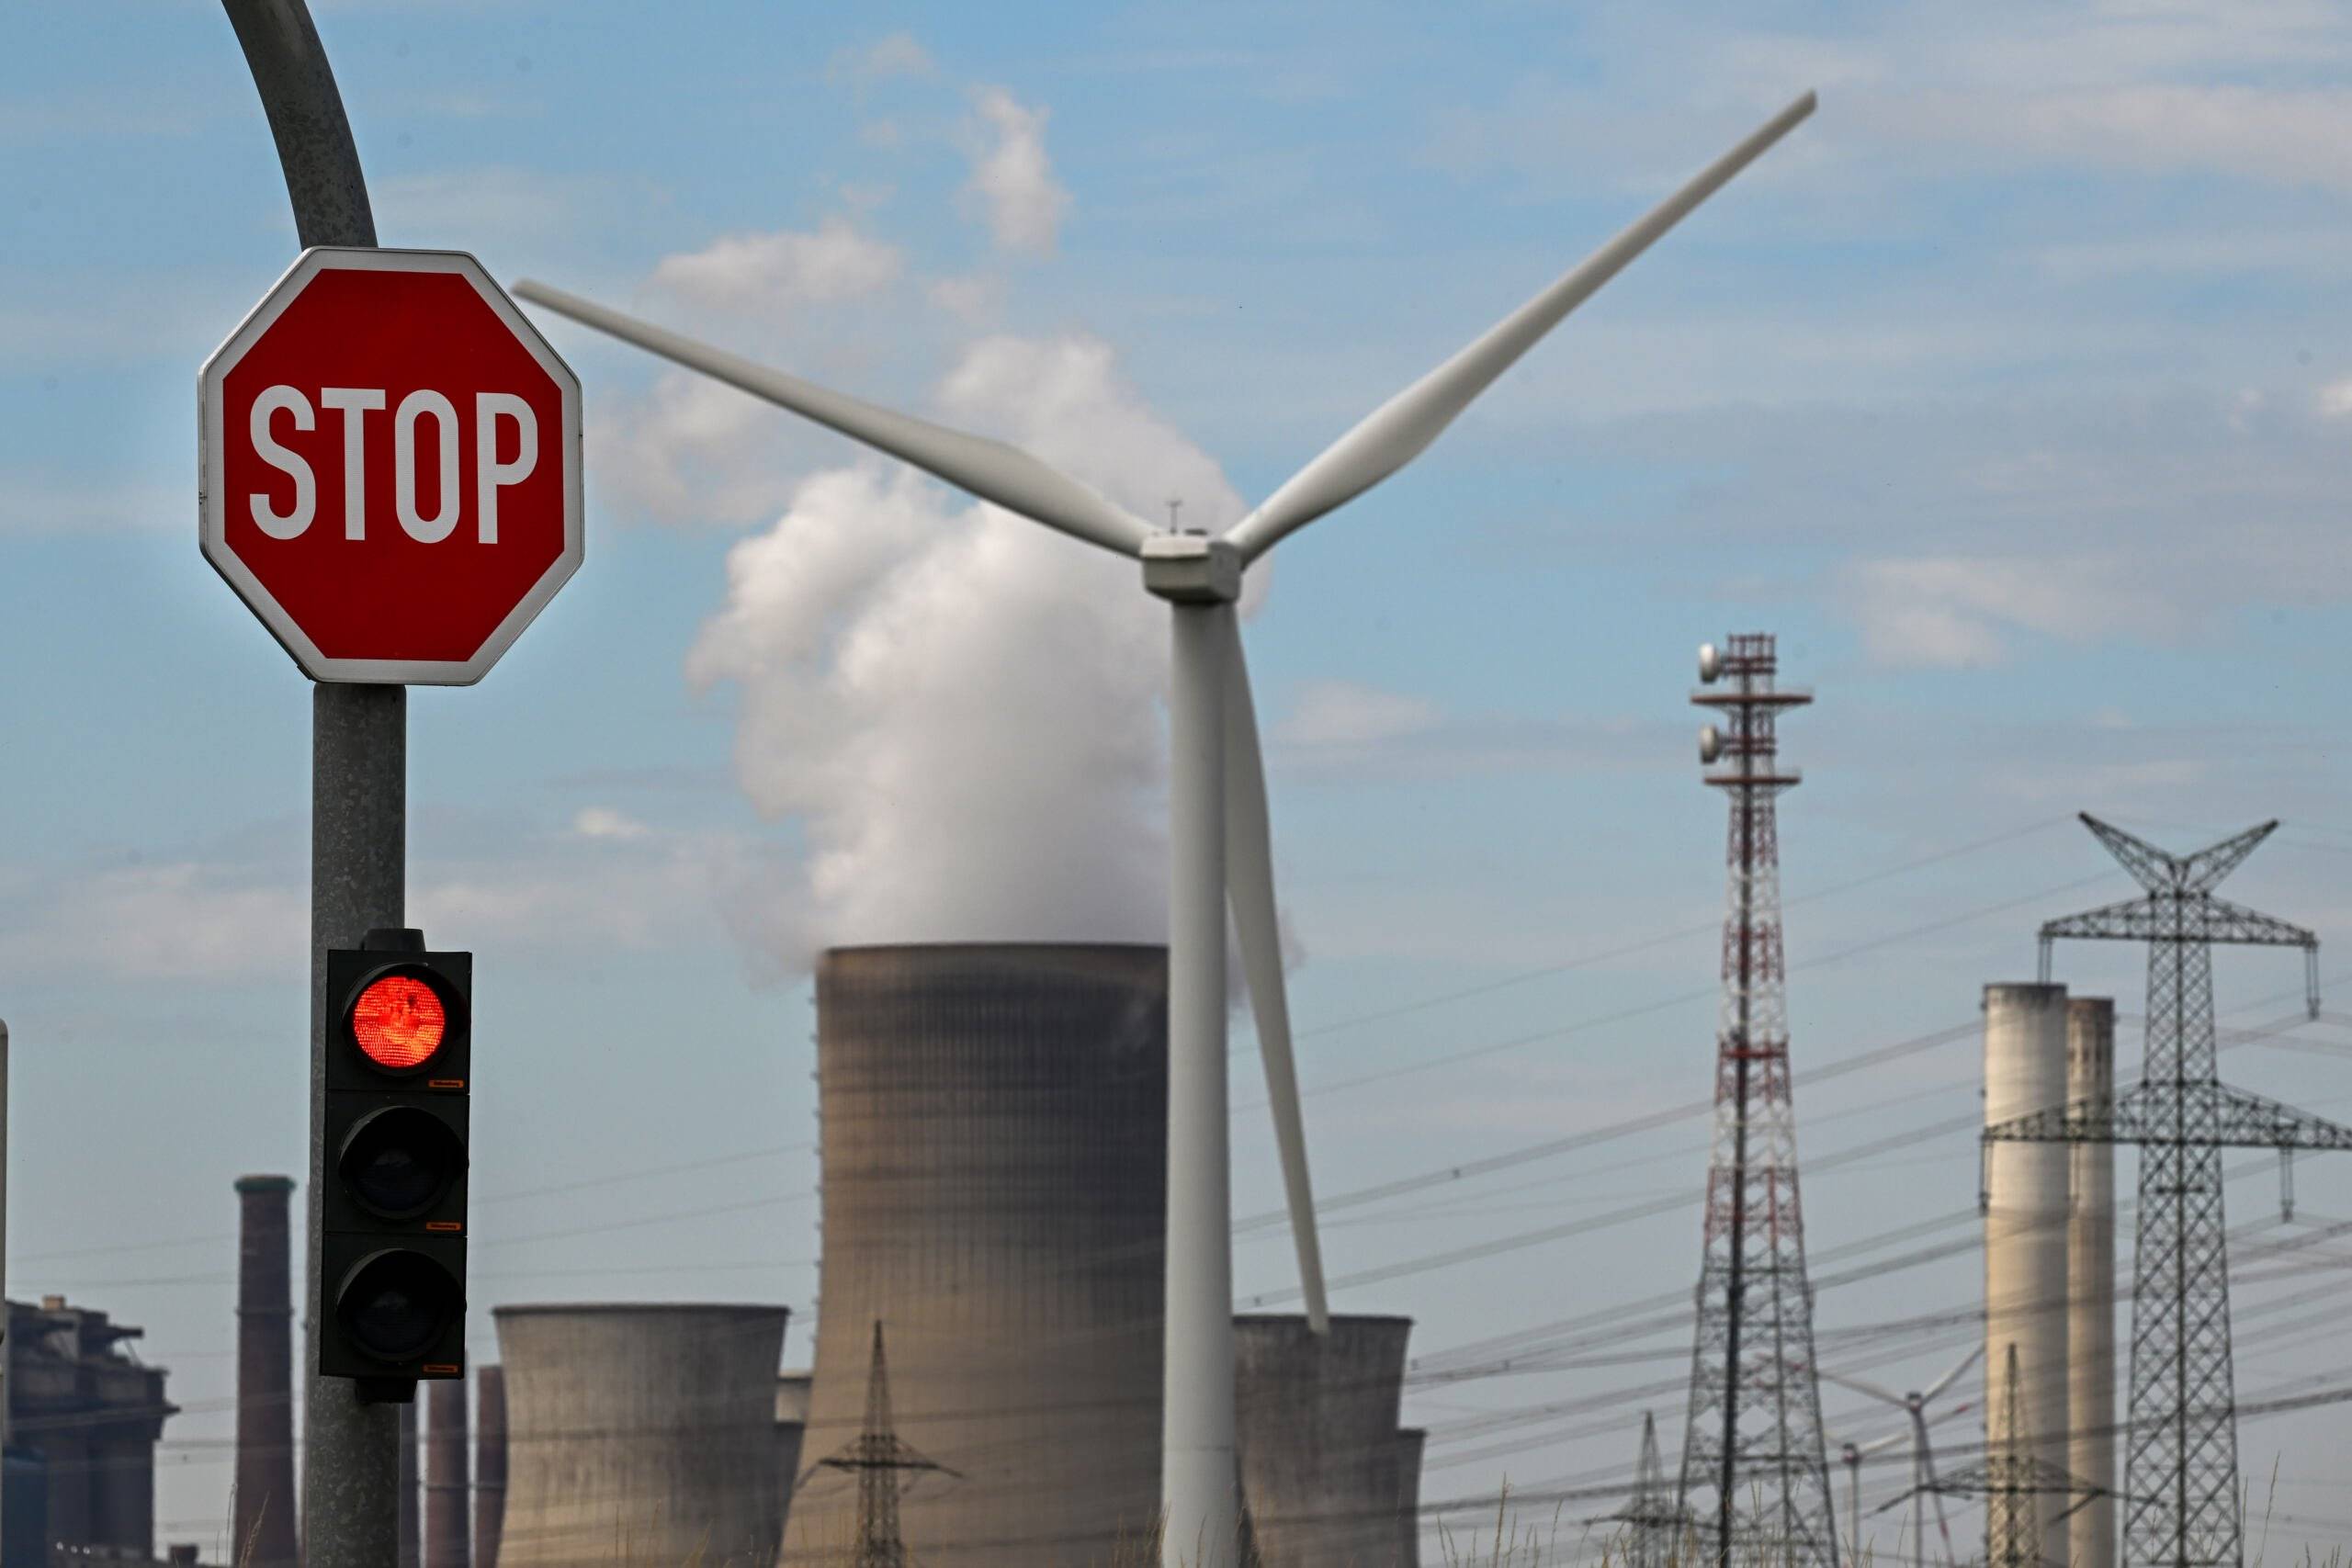 A stop sign and a wind turbine are seen in front of a coal-fired power plant operated by German energy supplier RWE in Niederaussem, western Germany, on July 13, 2022. - In response to a squeeze of Russian gas supplies, Germany has reactivated mothballed coal power plants to take the burden off gas. (Photo by Ina FASSBENDER / AFP)